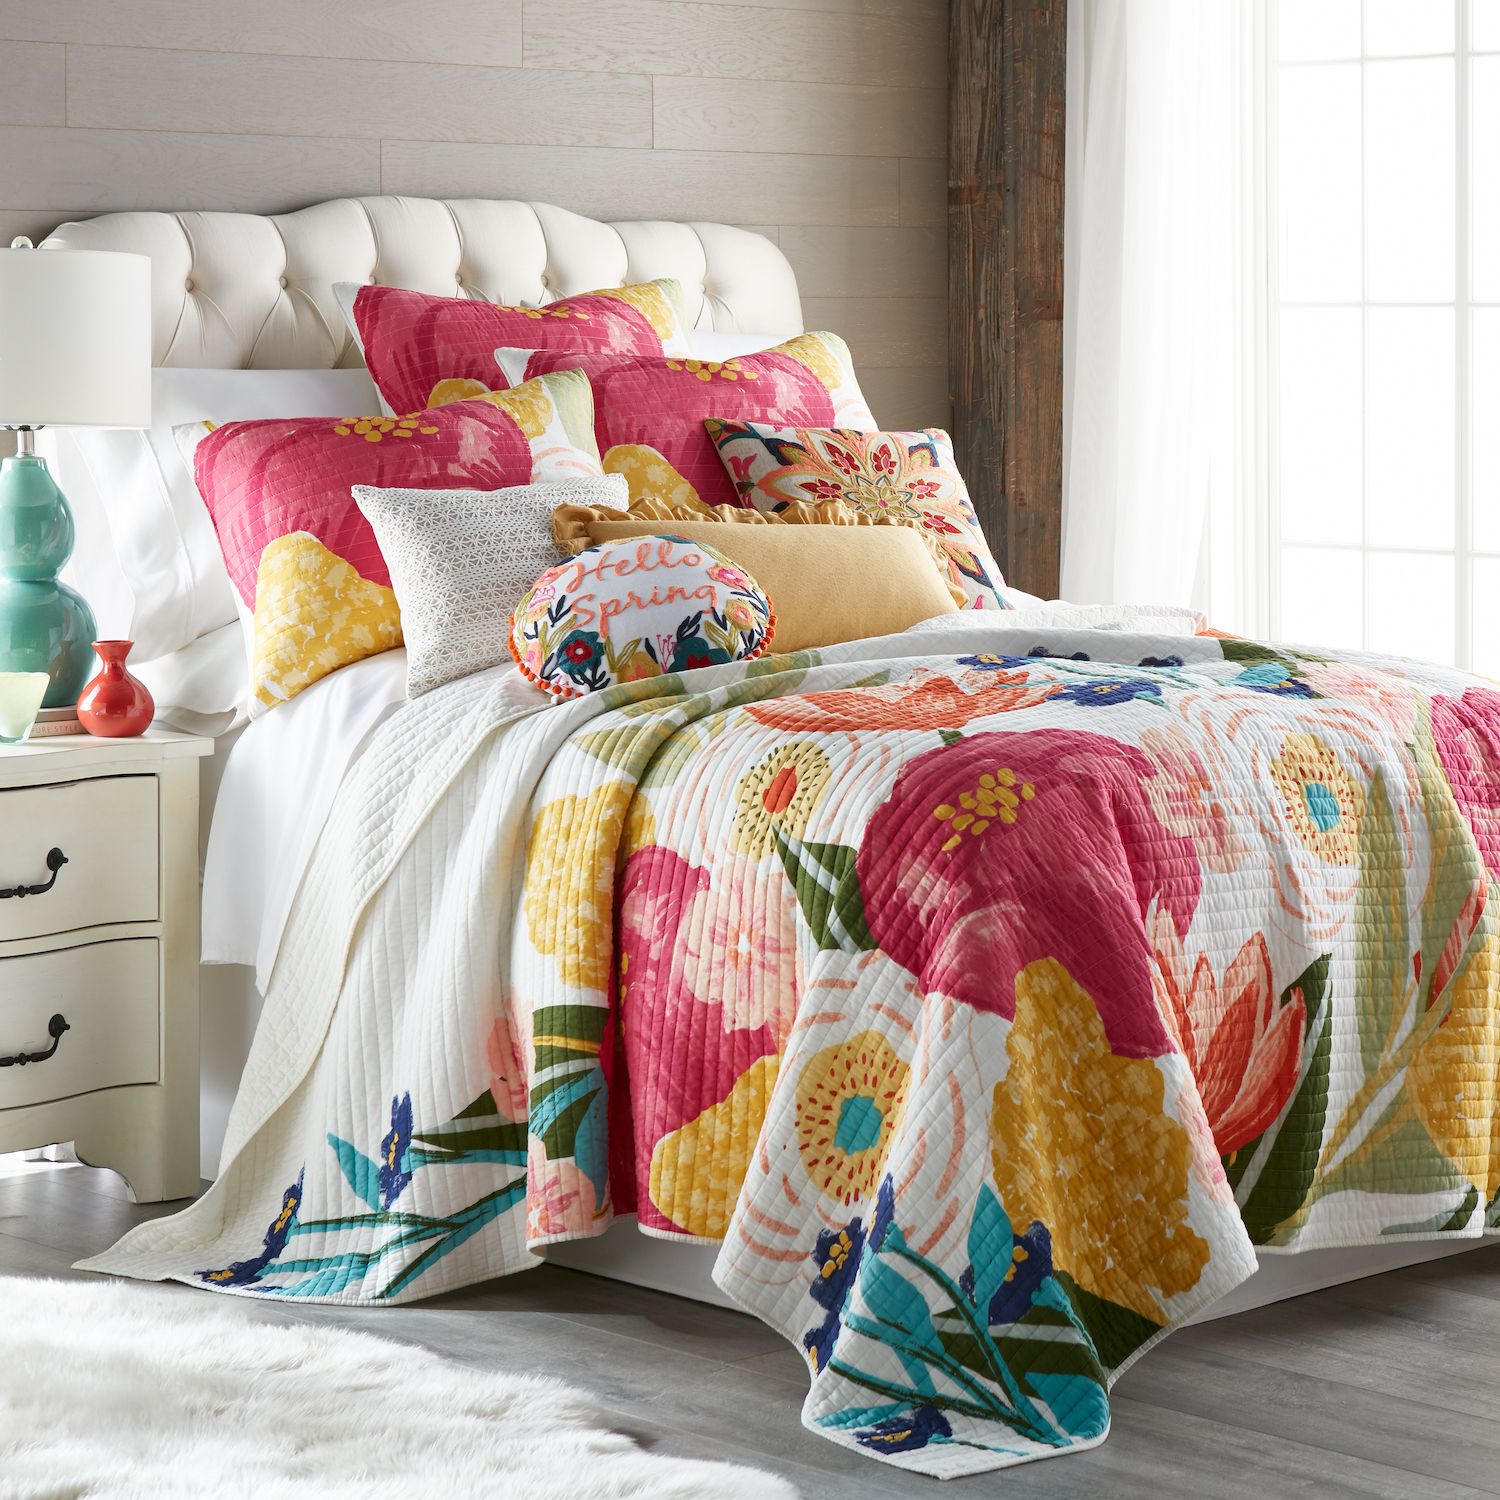 Image for Levtex Home Grandiflora Quilt Set and Shams at Kohl's.